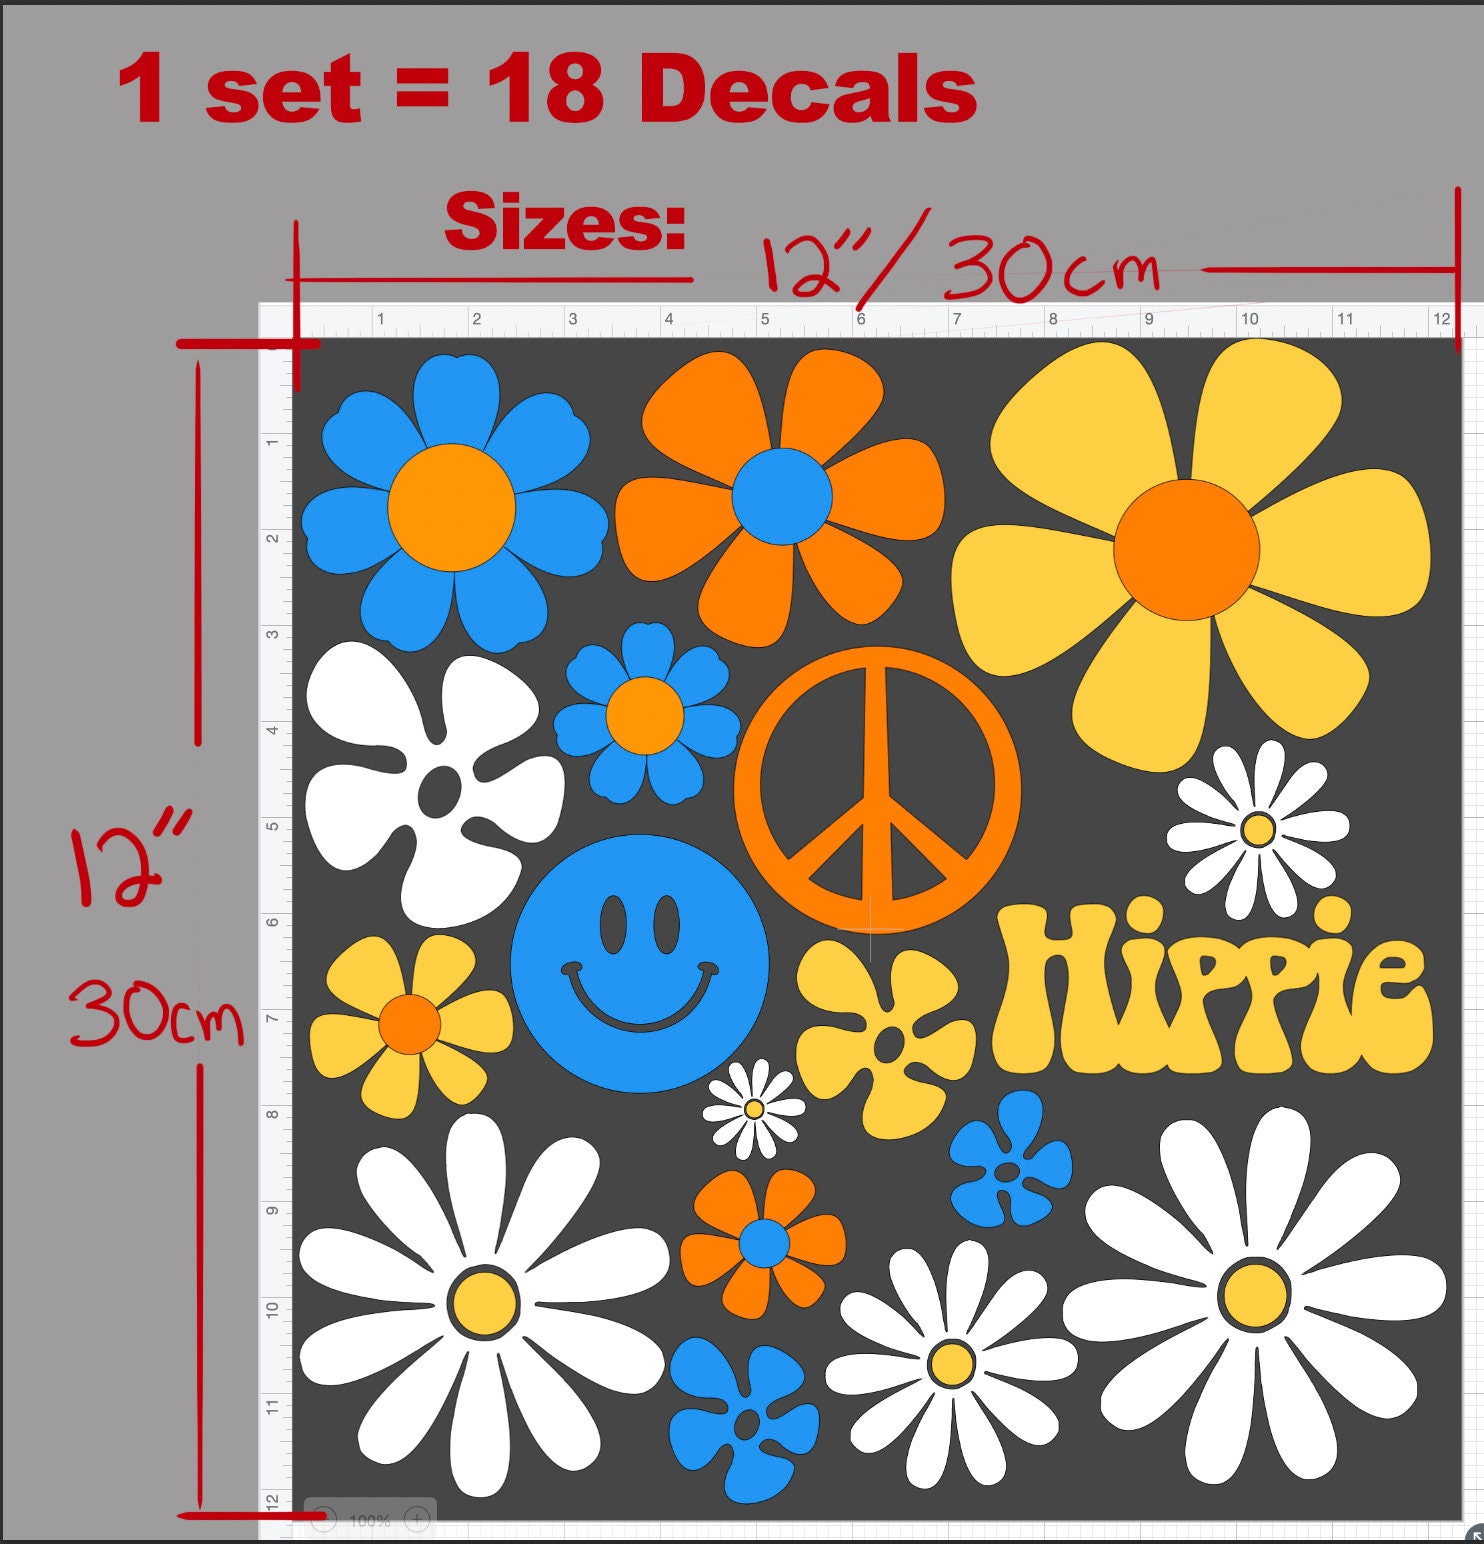 AWEELON 1200 PCS Boho Daisy Stickers Hippie Groovy Stickers Retro Flowers  Self-Adhesive Decals Daisy Flowers Stickers 60s 70s Party Favors for Kids